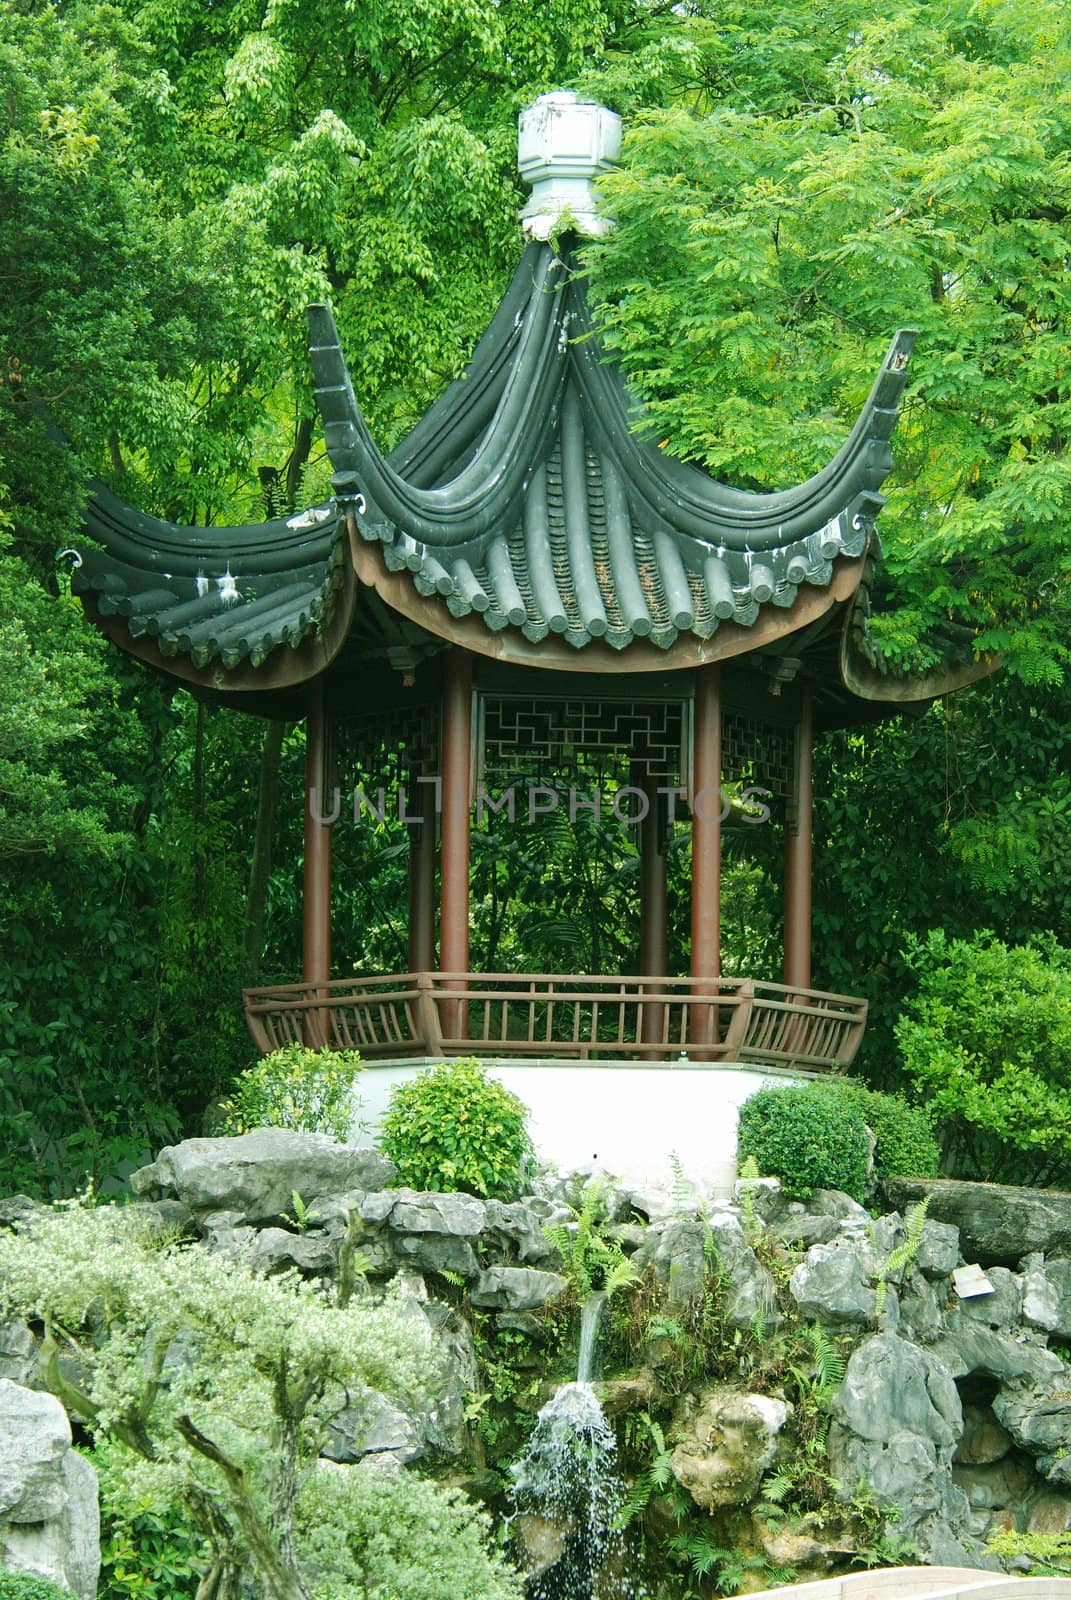 A view of ancient chinese architecture in a park.